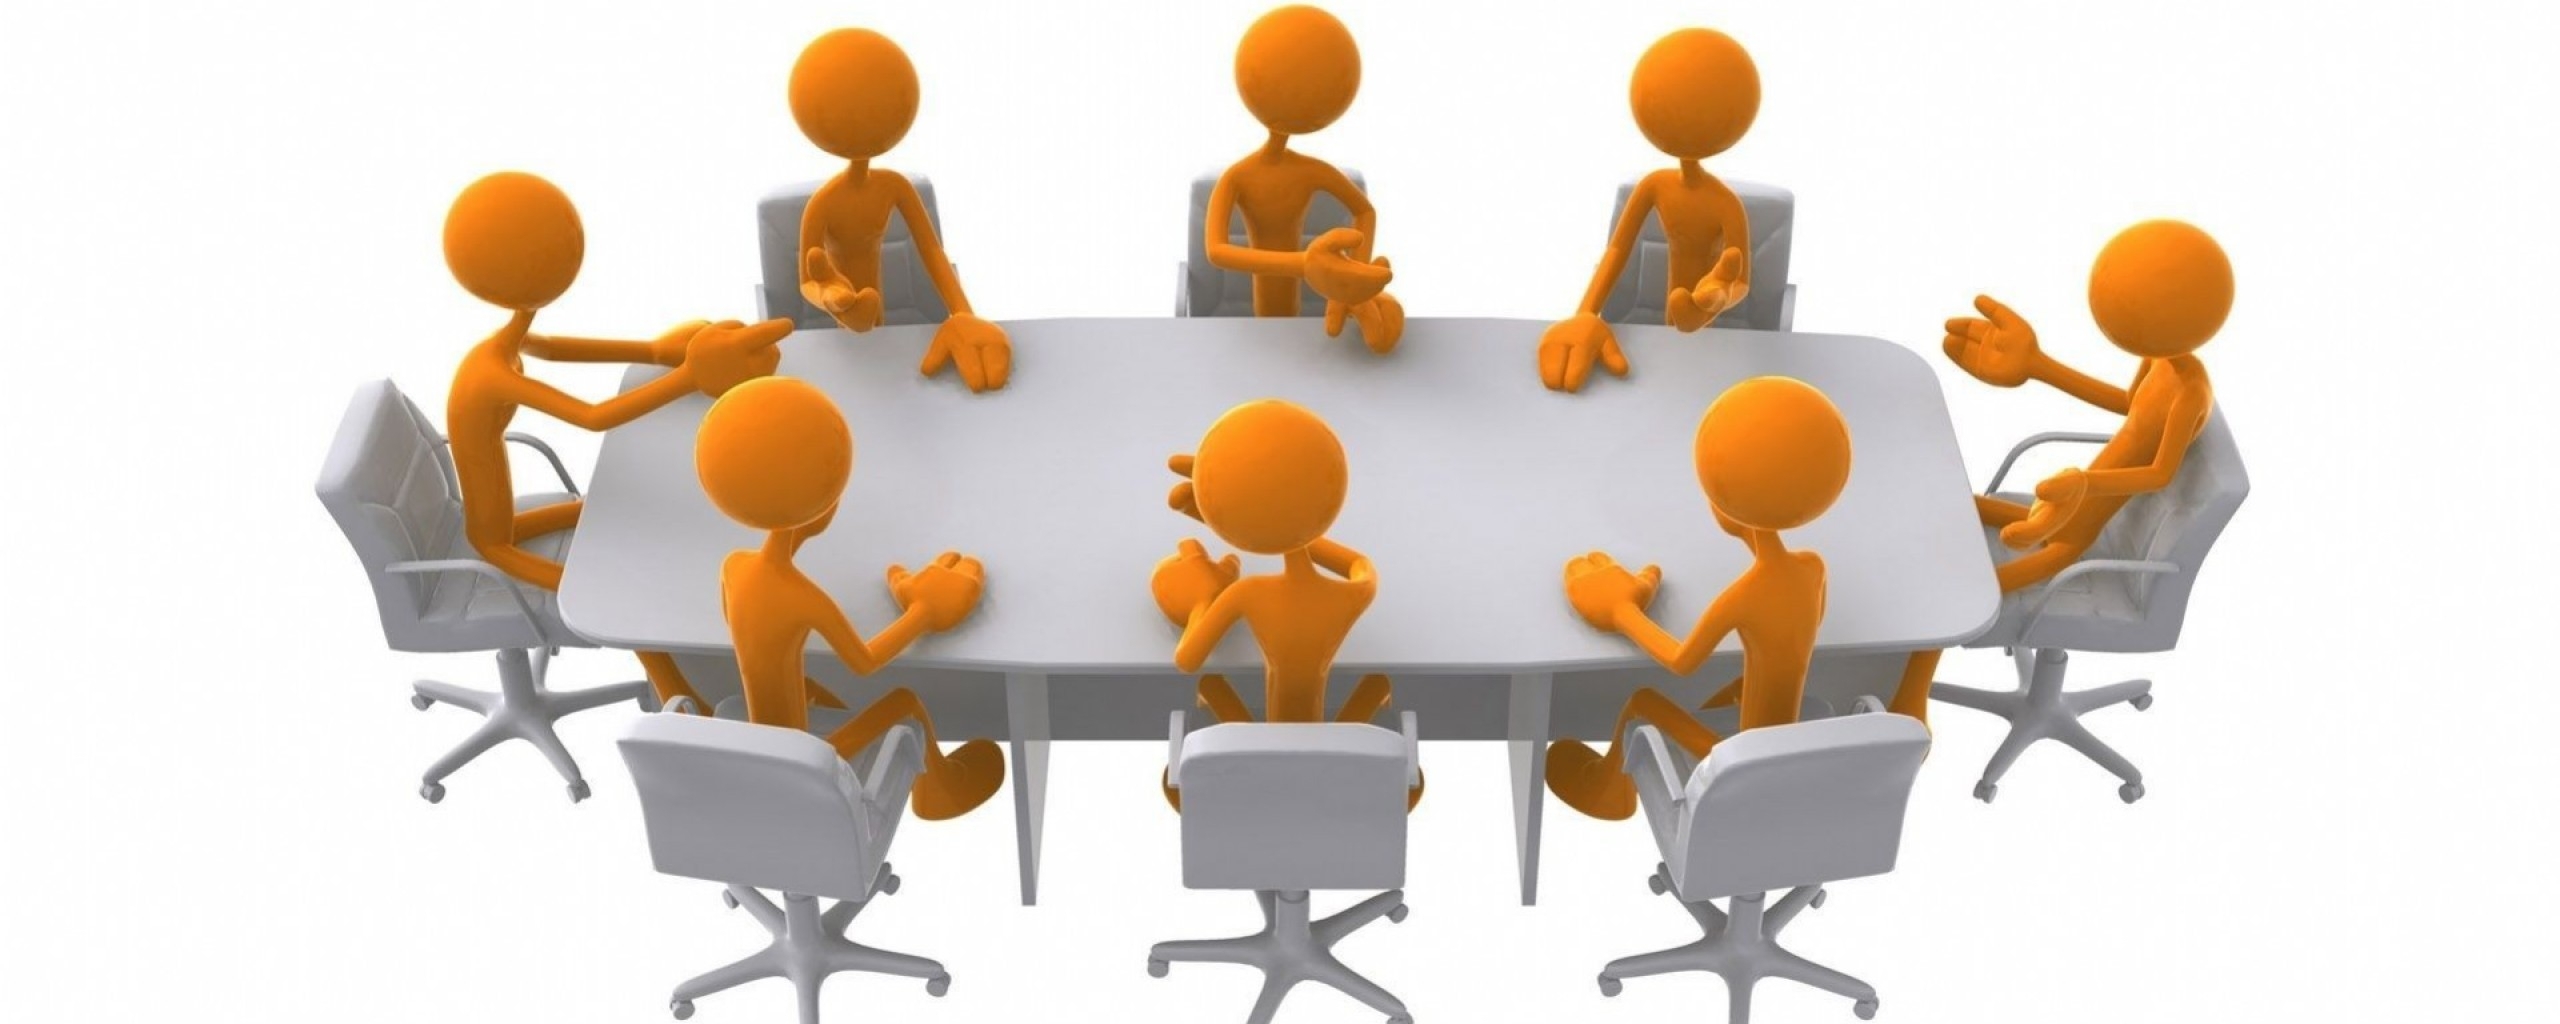 business clipart business meeting